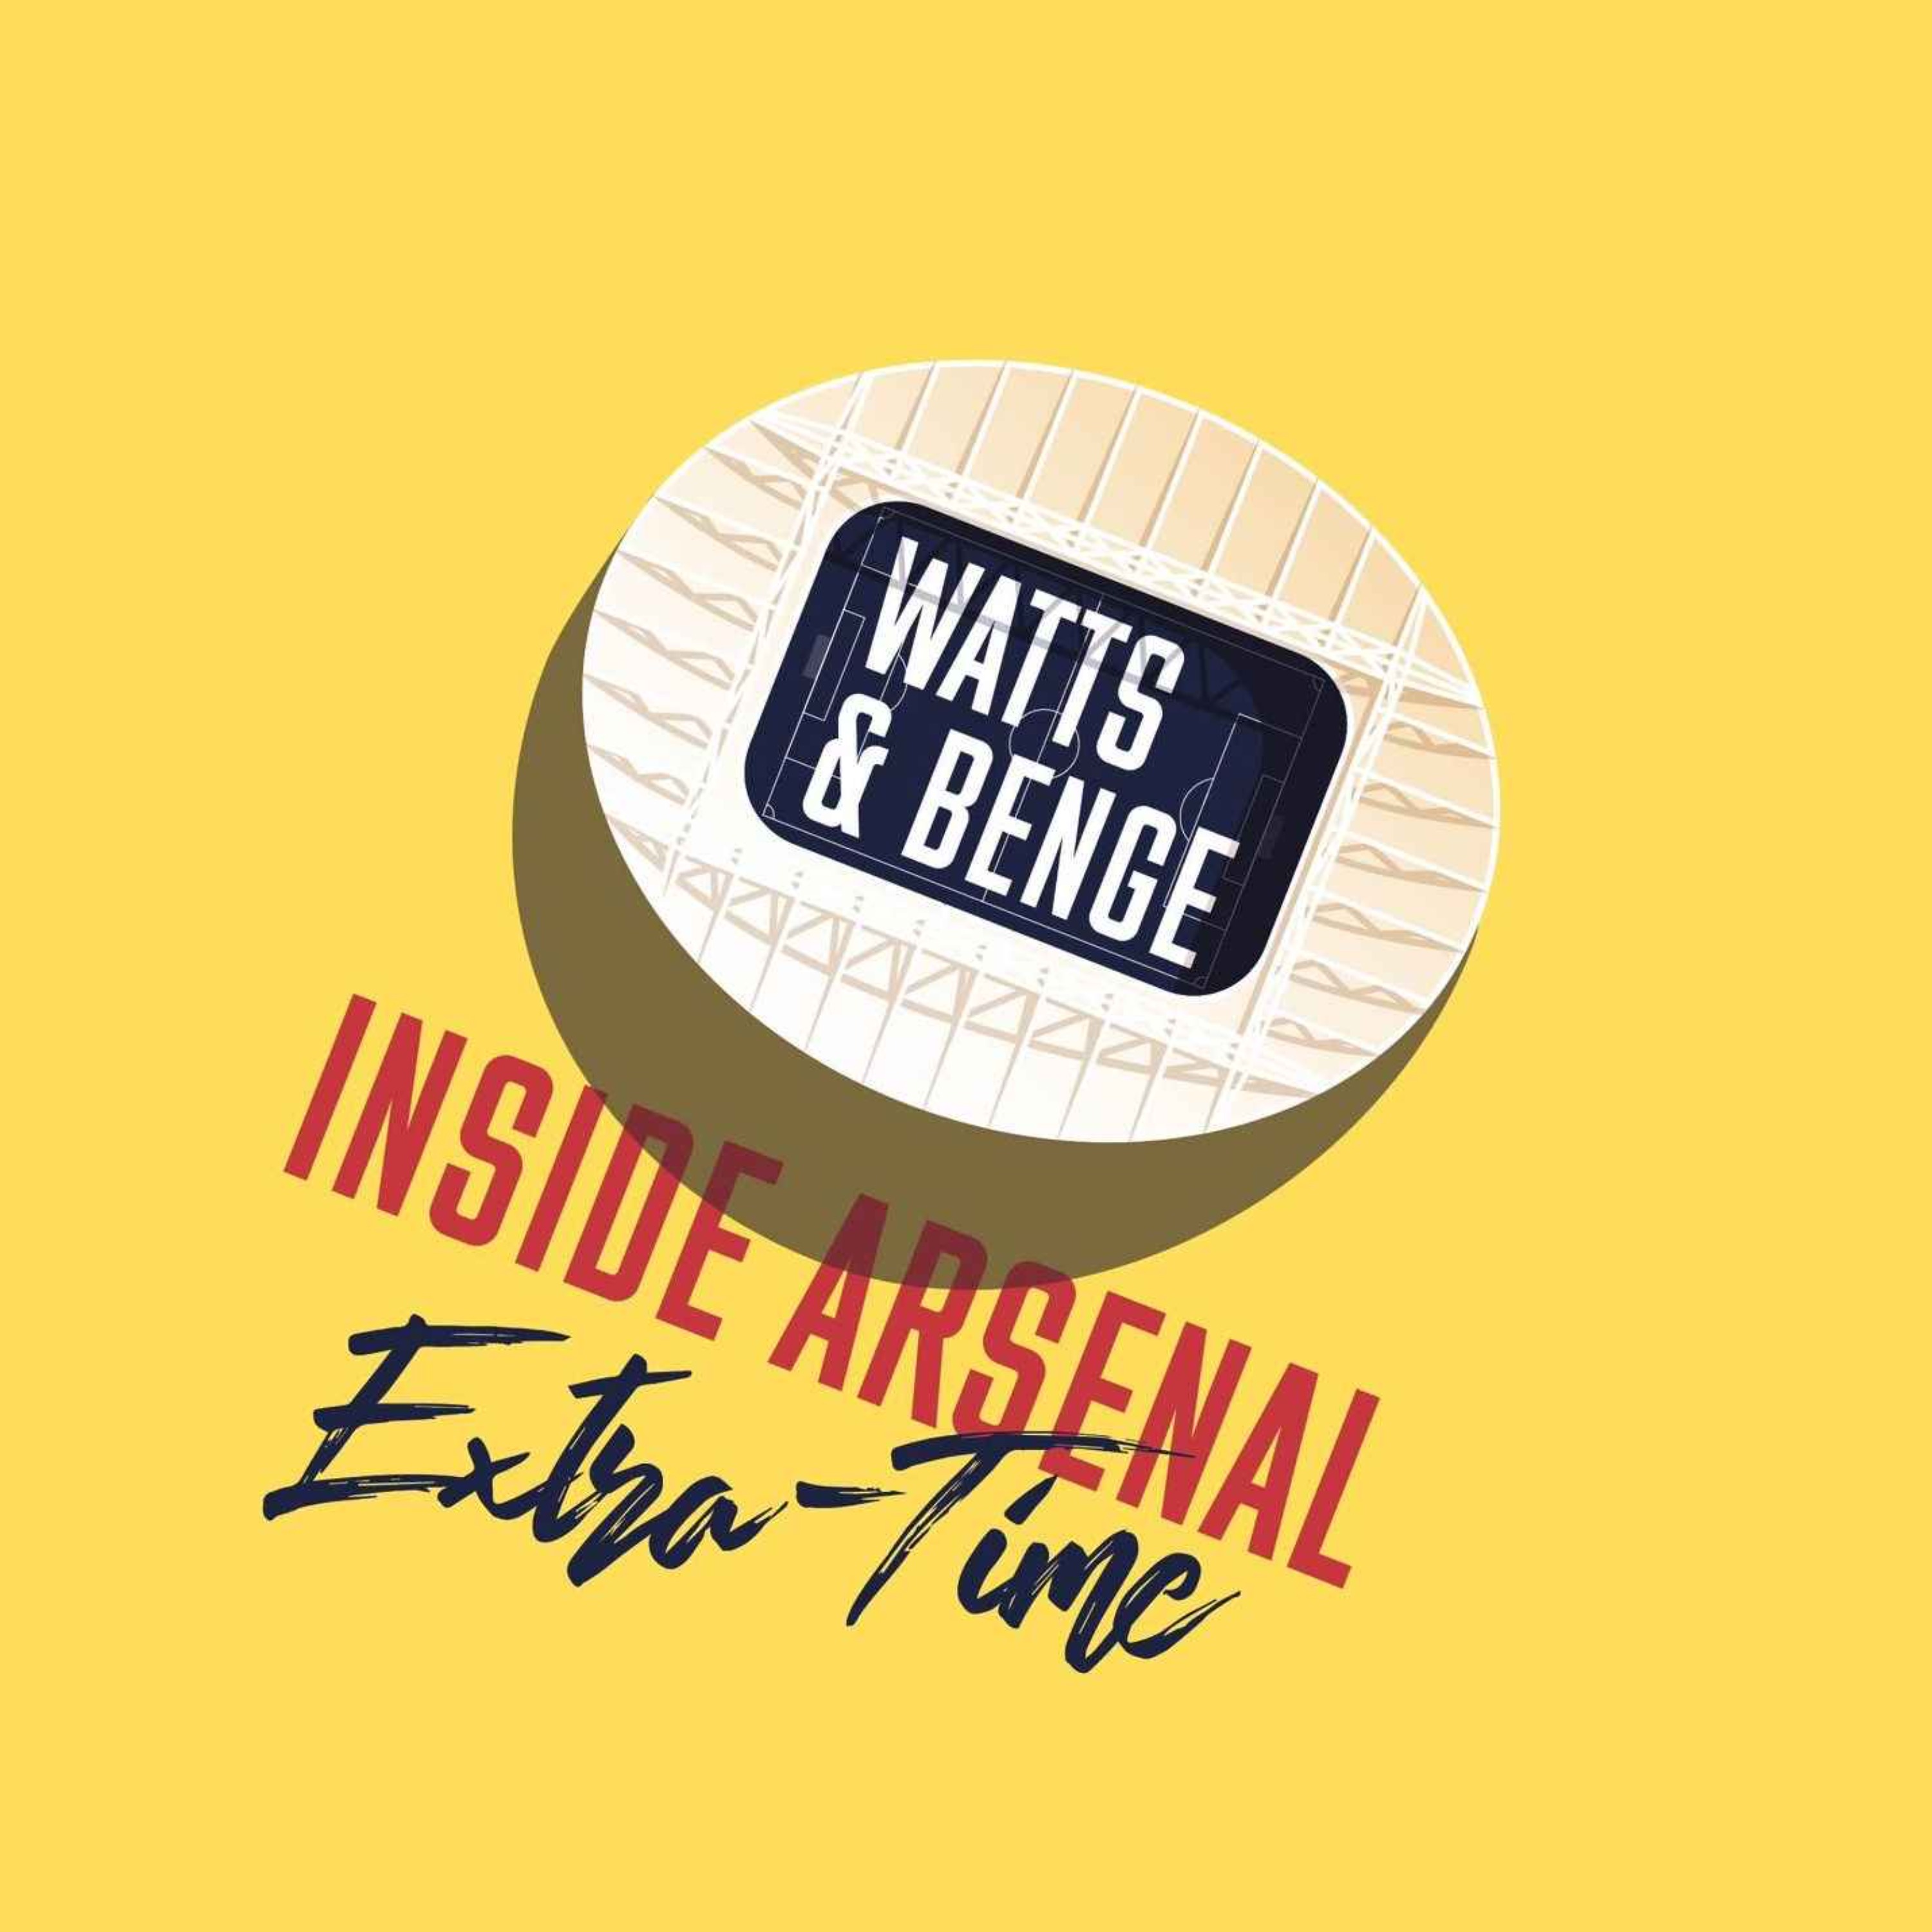 Extra-time with James Benge: Arsenal's perfect summer - Ins, outs, loans and contracts